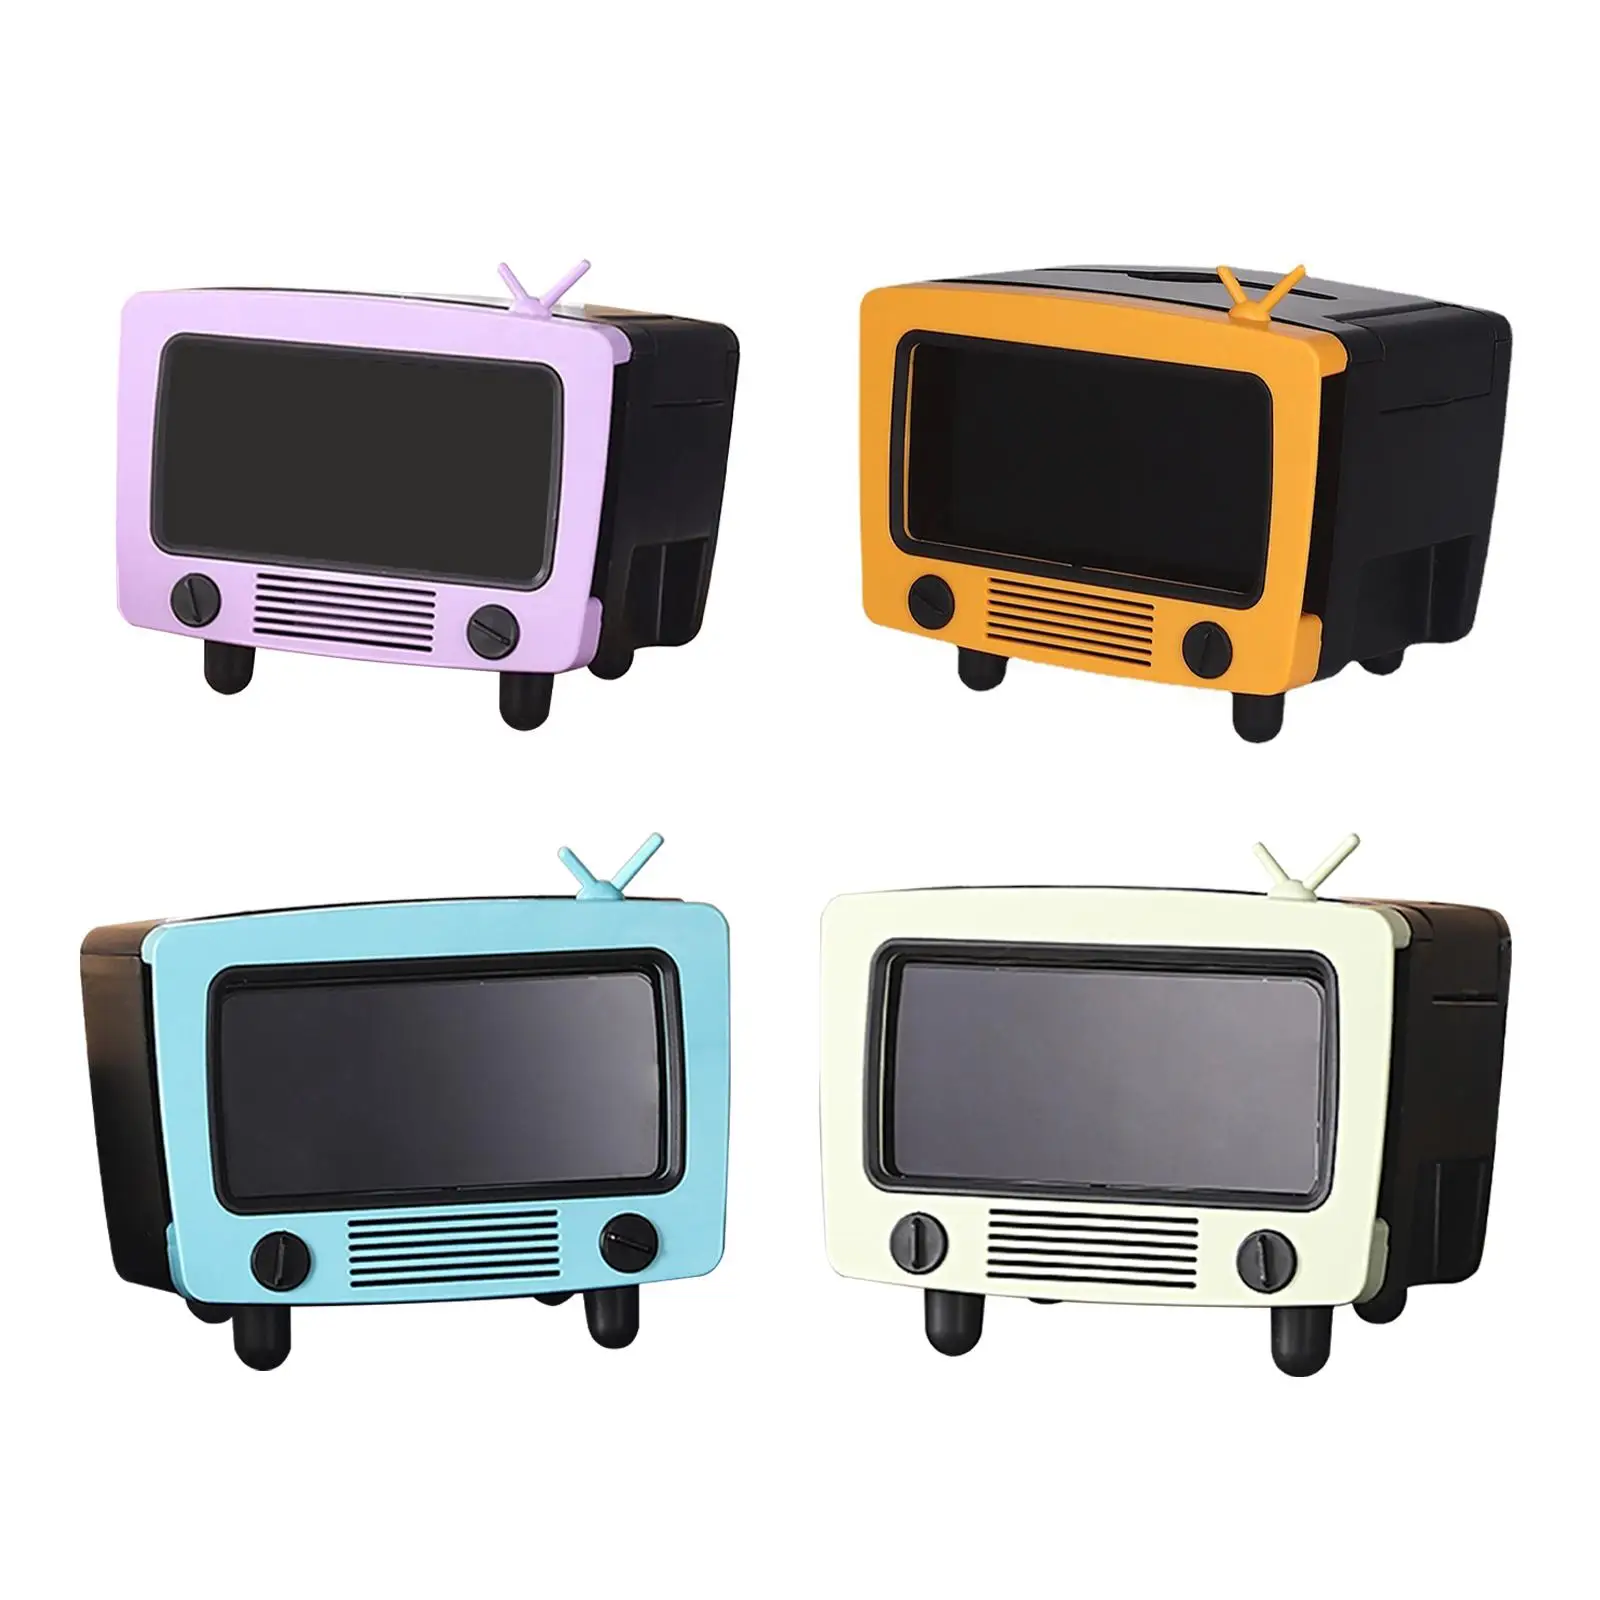 TV Shaped Tissue Box, Phone Holder Stand Cute Practical  Container for Vanity Countertops Office Desktop Decor for All Phones